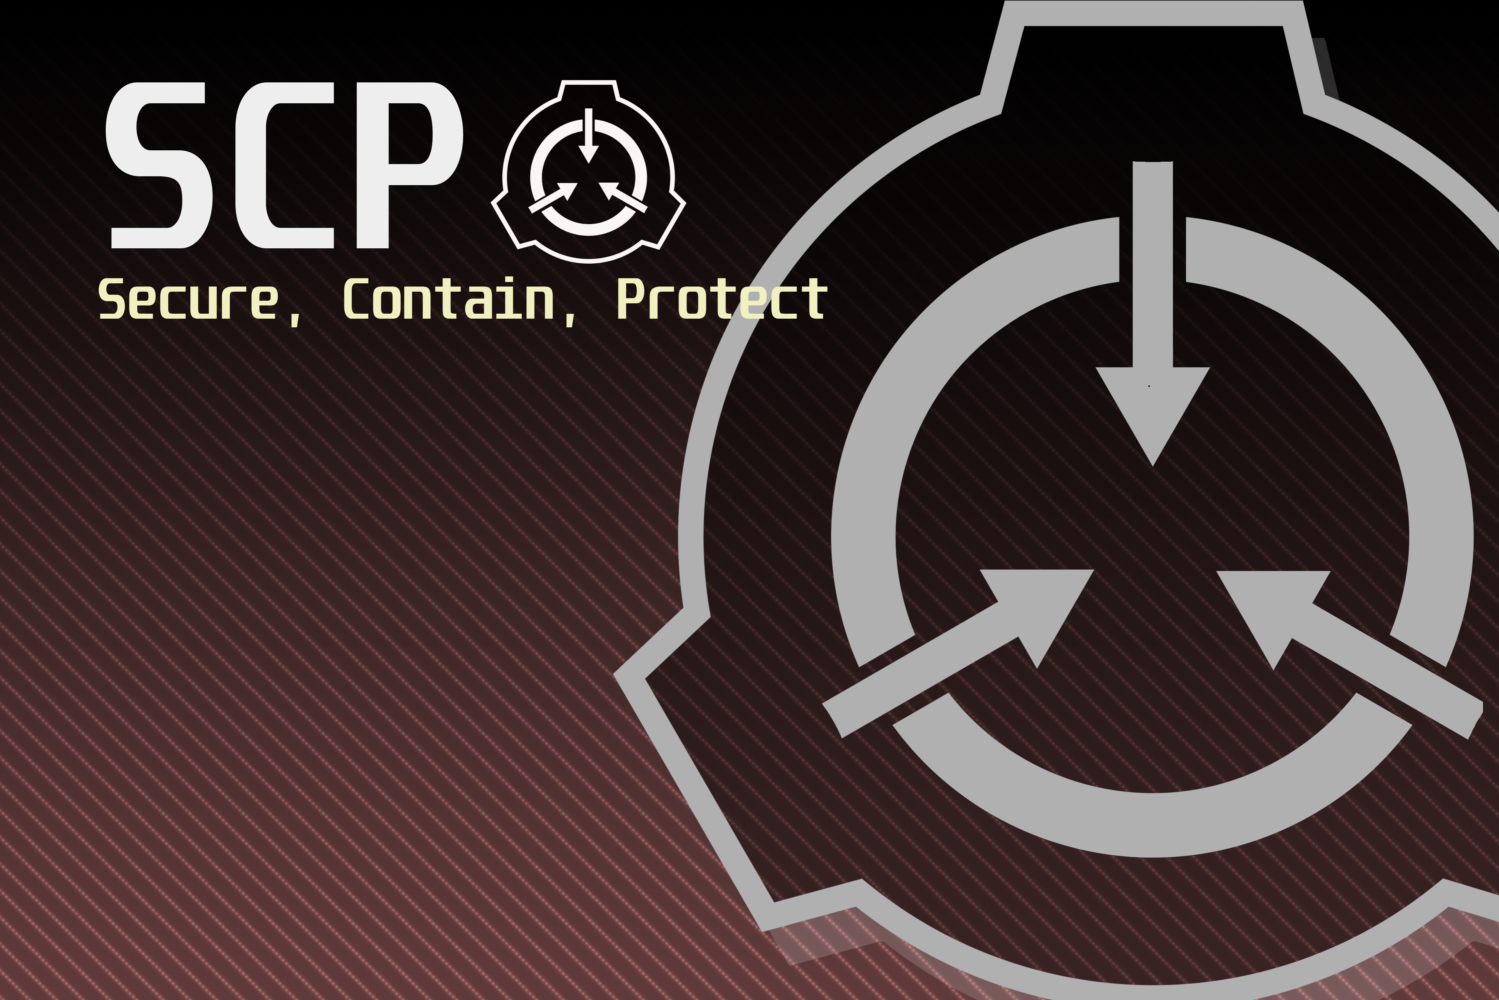 scp containment breach download problems